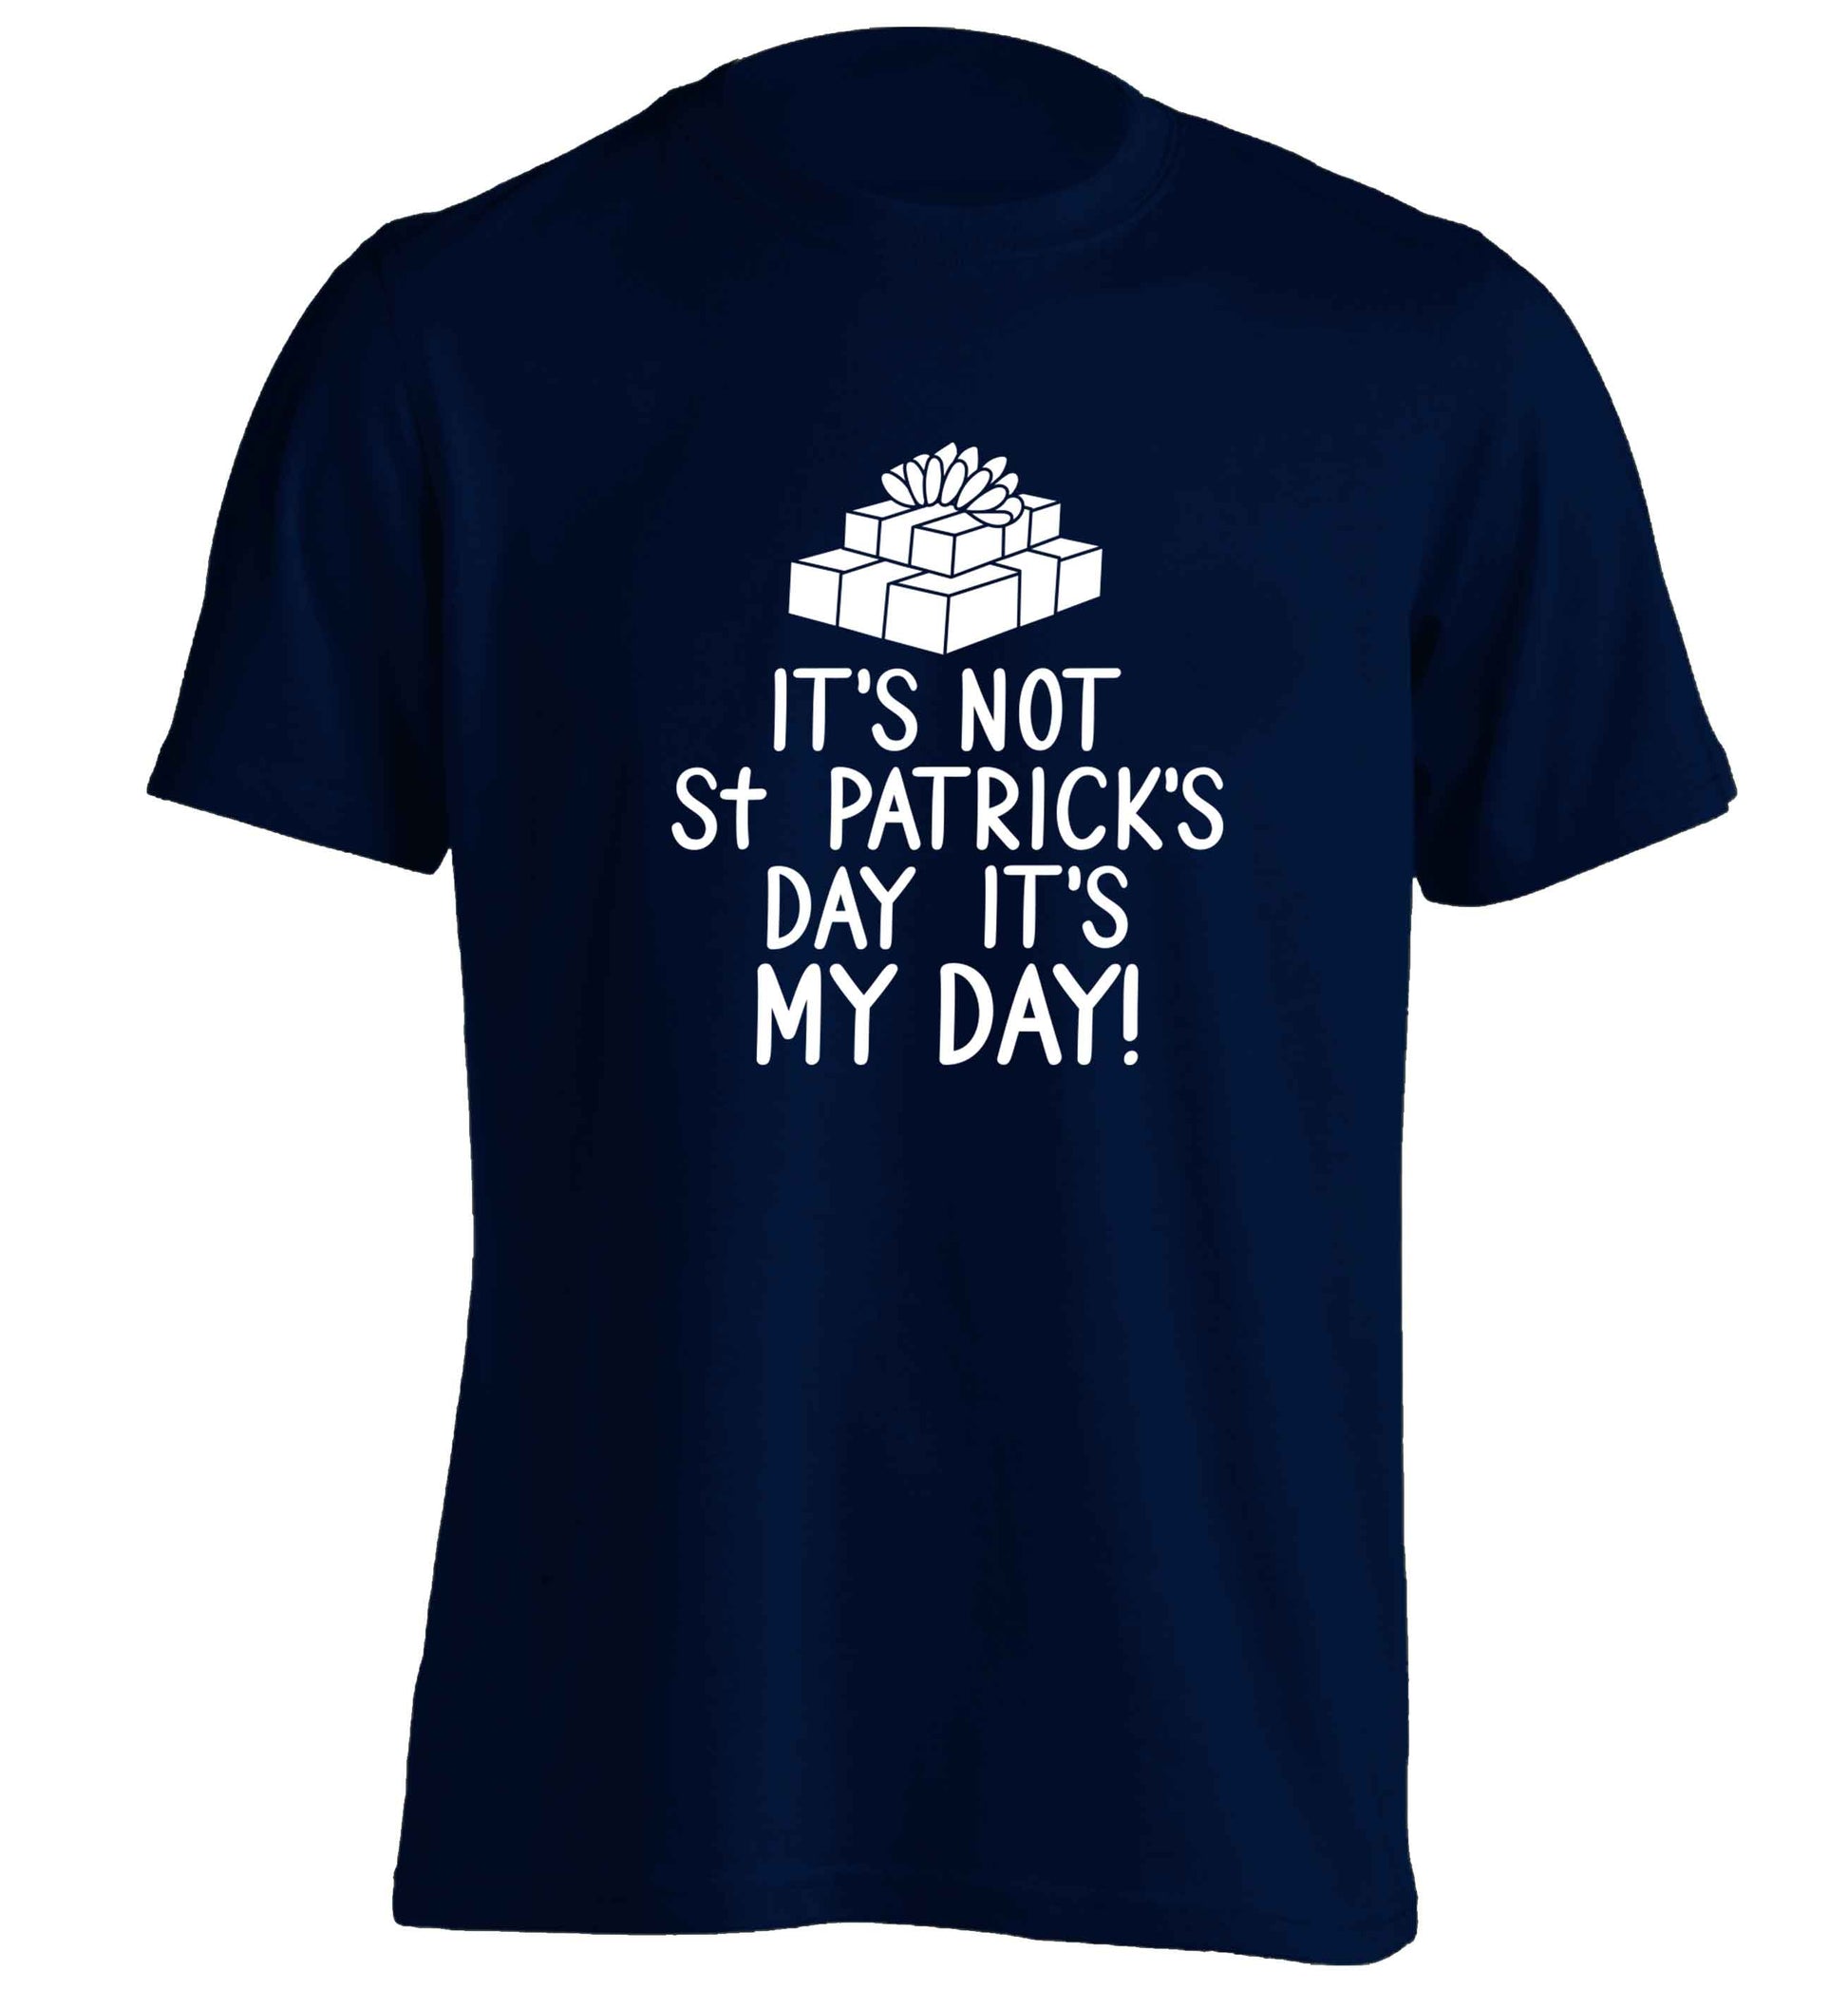 Funny gifts for your mum on mother's dayor her birthday! It's not St Patricks day it's my day adults unisex navy Tshirt 2XL